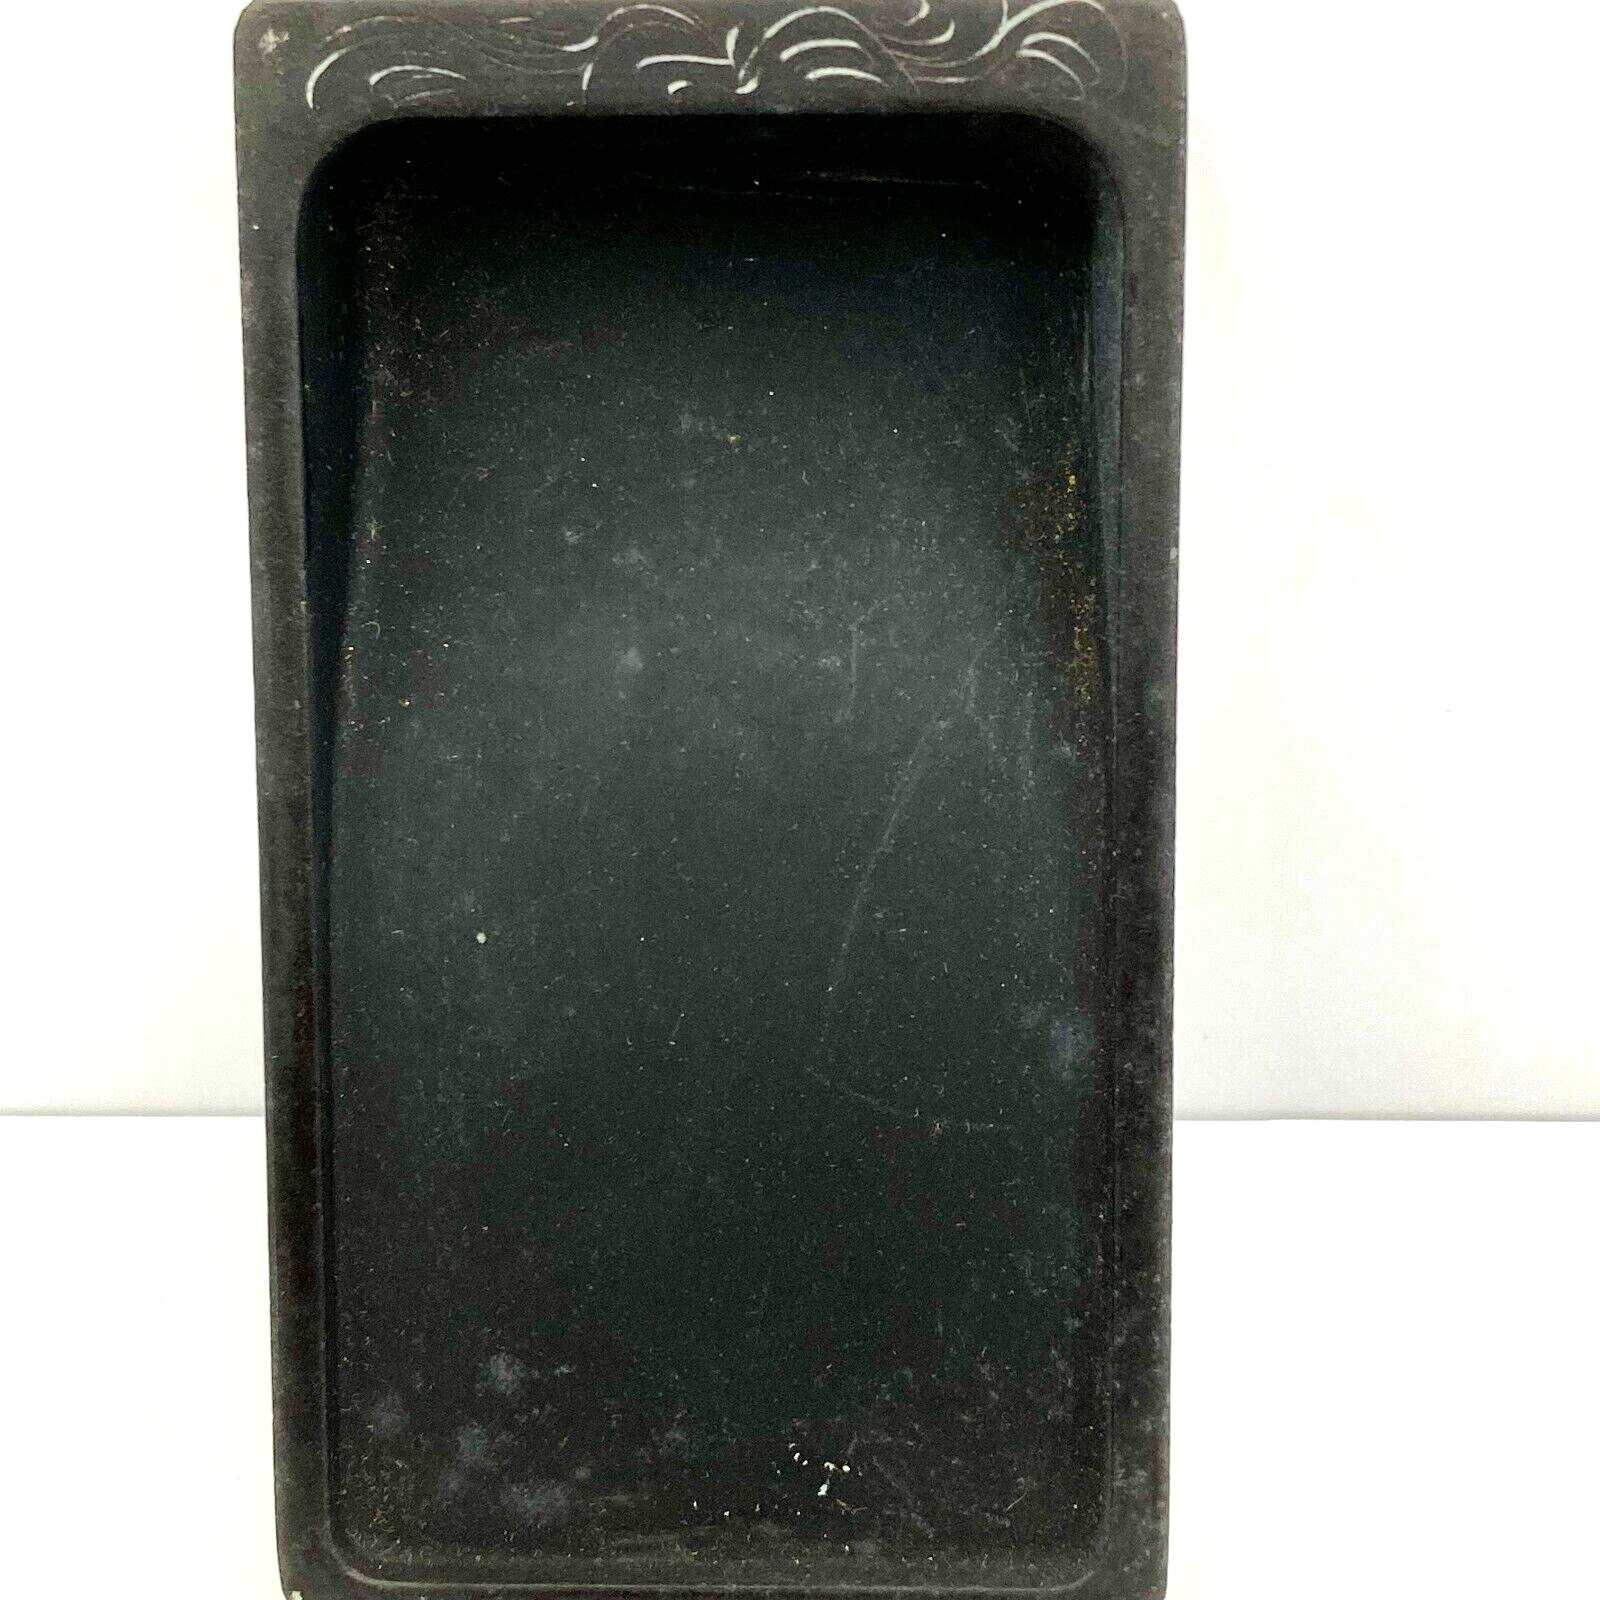 Japanese Inkstone for Calligraphy in Original Box Pre-Owned by Teacher